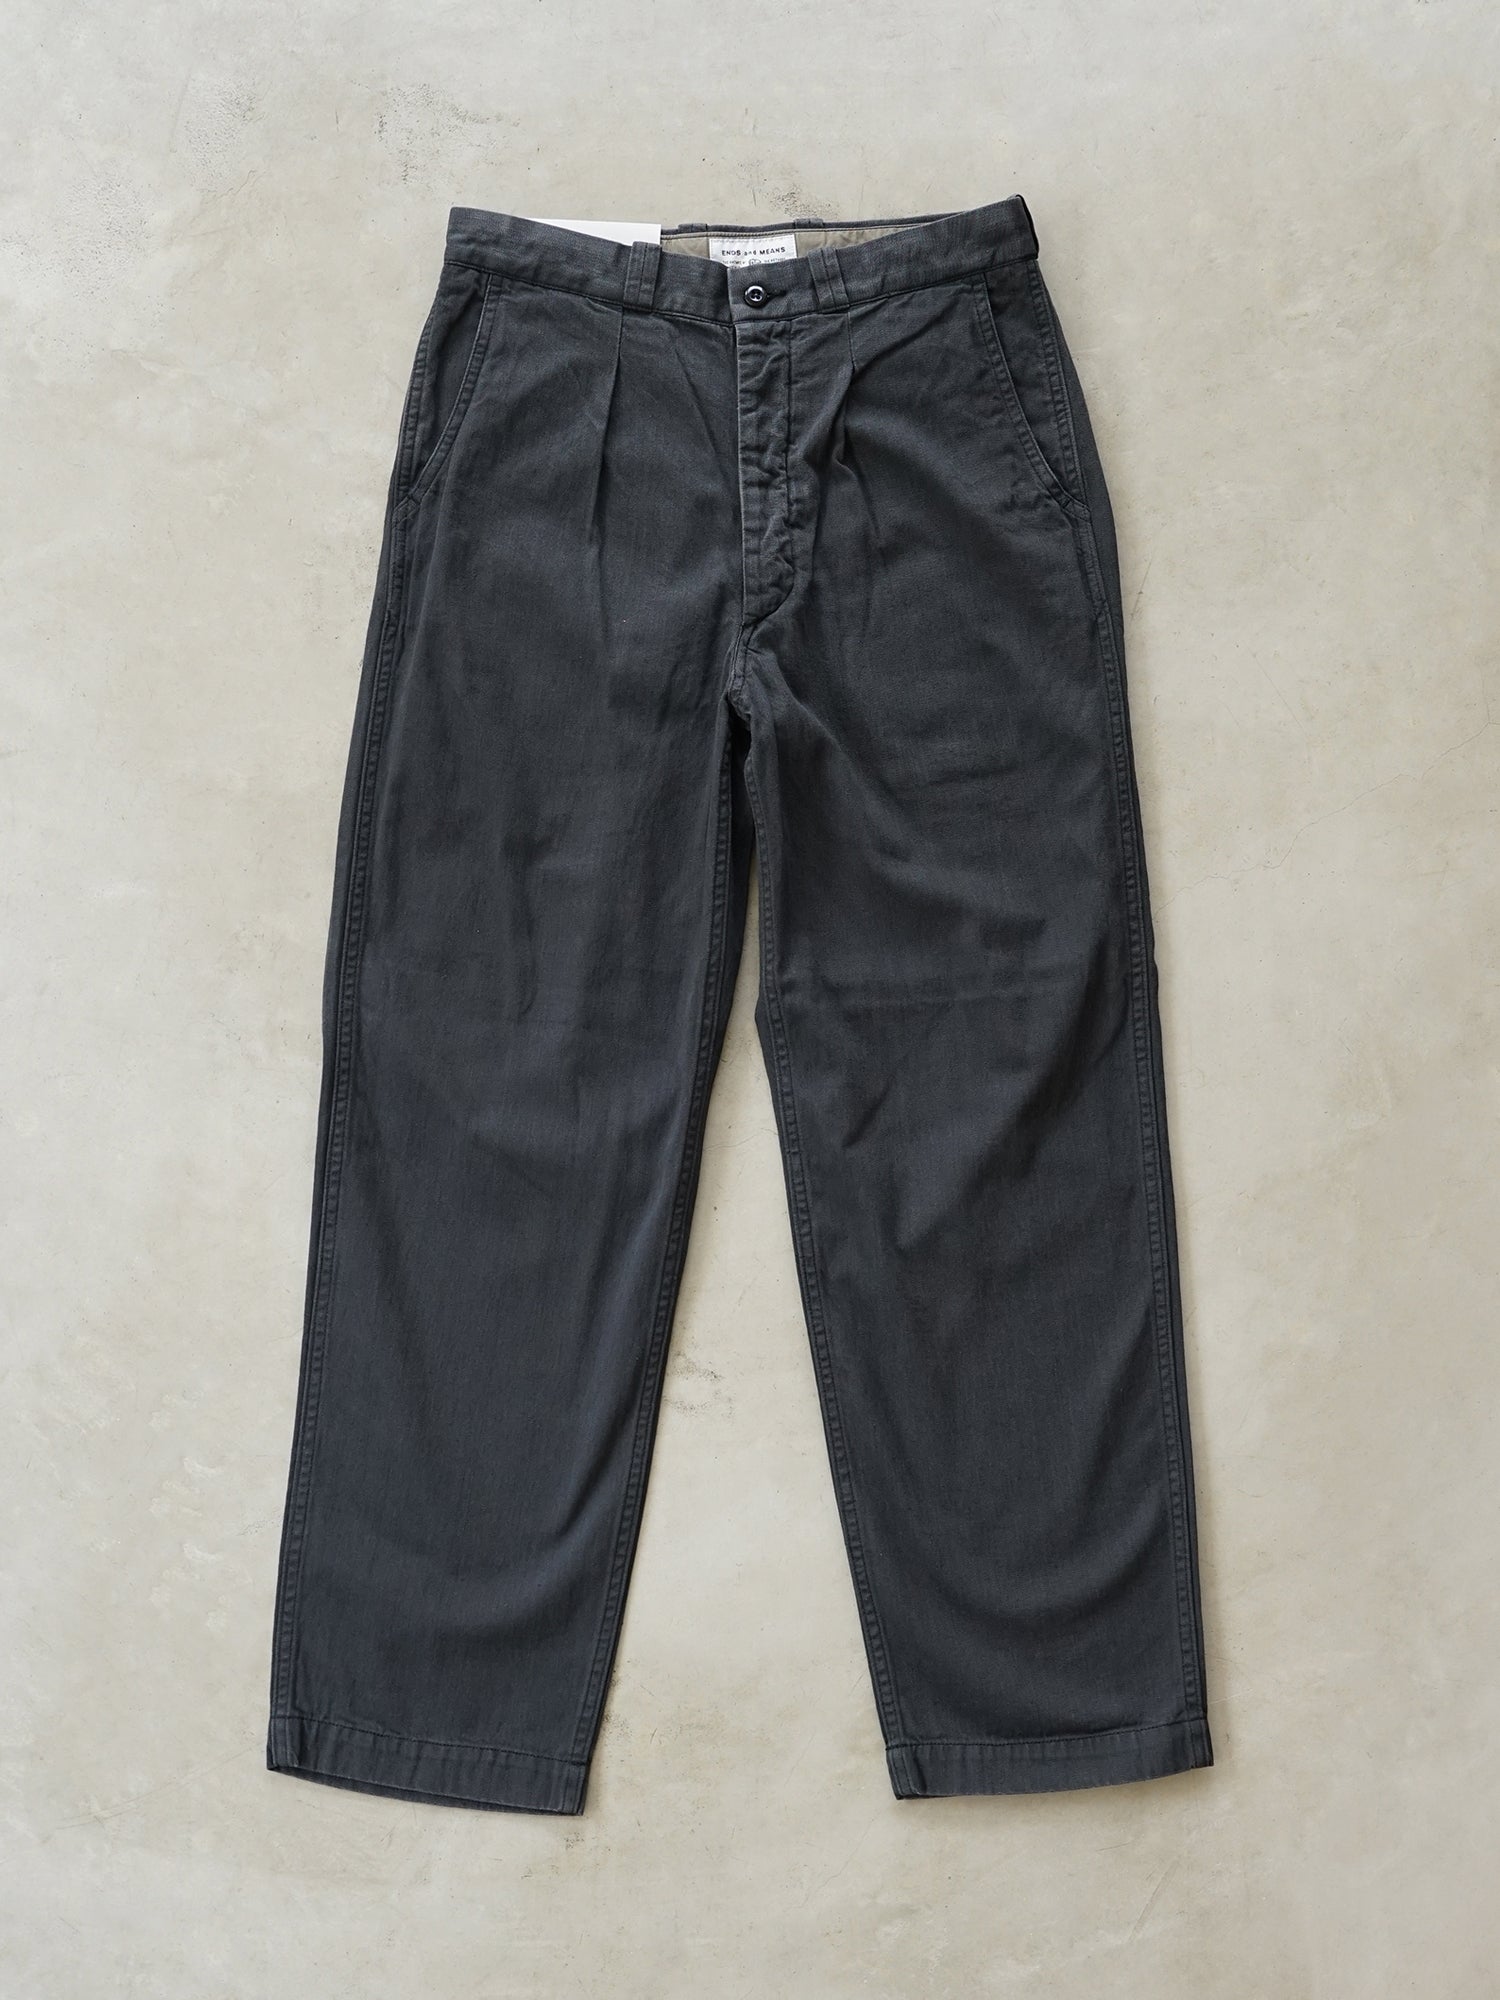 ENDS and MEANS Army Chino Gray Denim – CUXTON HOUSE